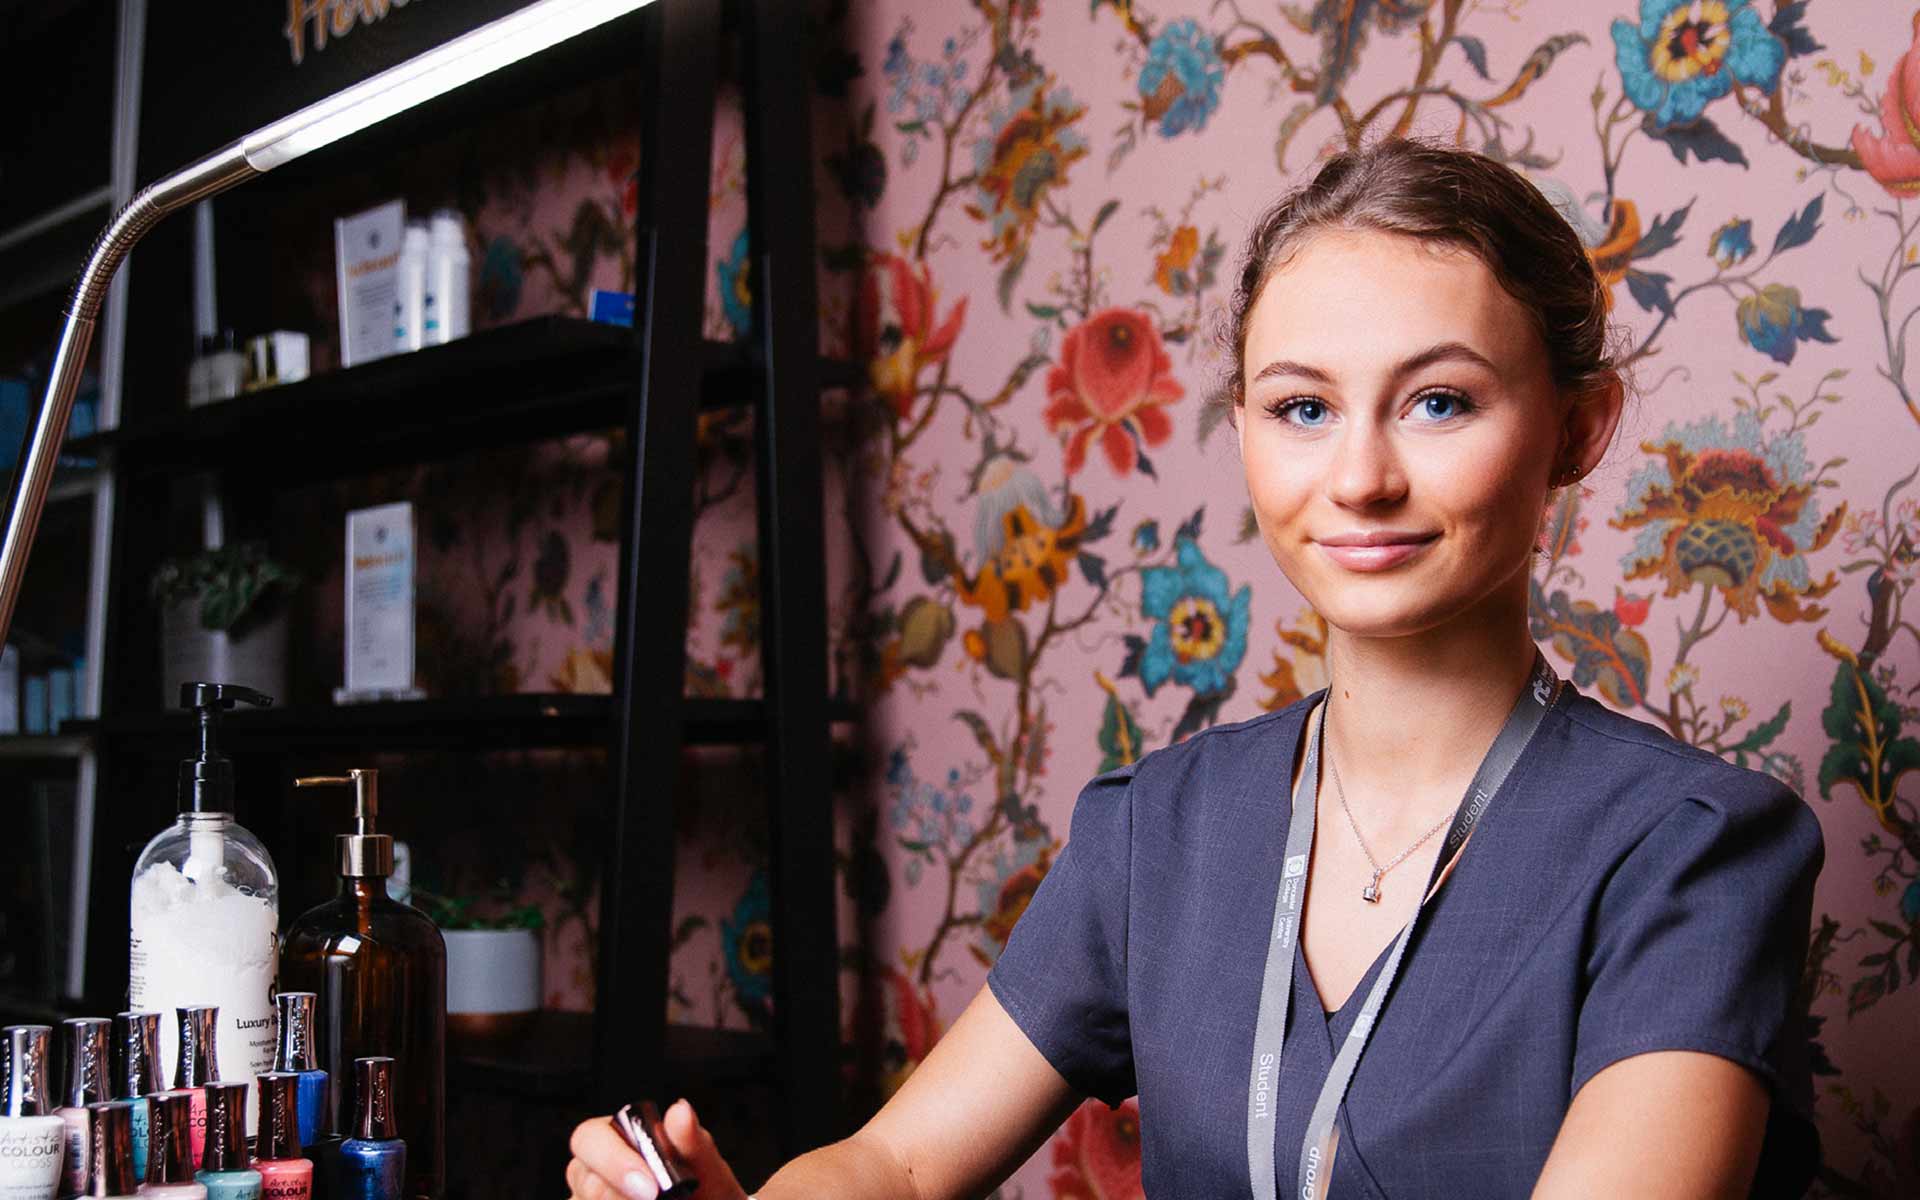 Student Freya sits in front of a pastel pink wallpaper featuring large, vibrant illustrations of flowers and branches. To her side and further into the background are a variety of make up products and items including lotions and nail polish coloured bottles. Freya wears a professional uniform and is holding the lid of a nail polish bottle in her hand